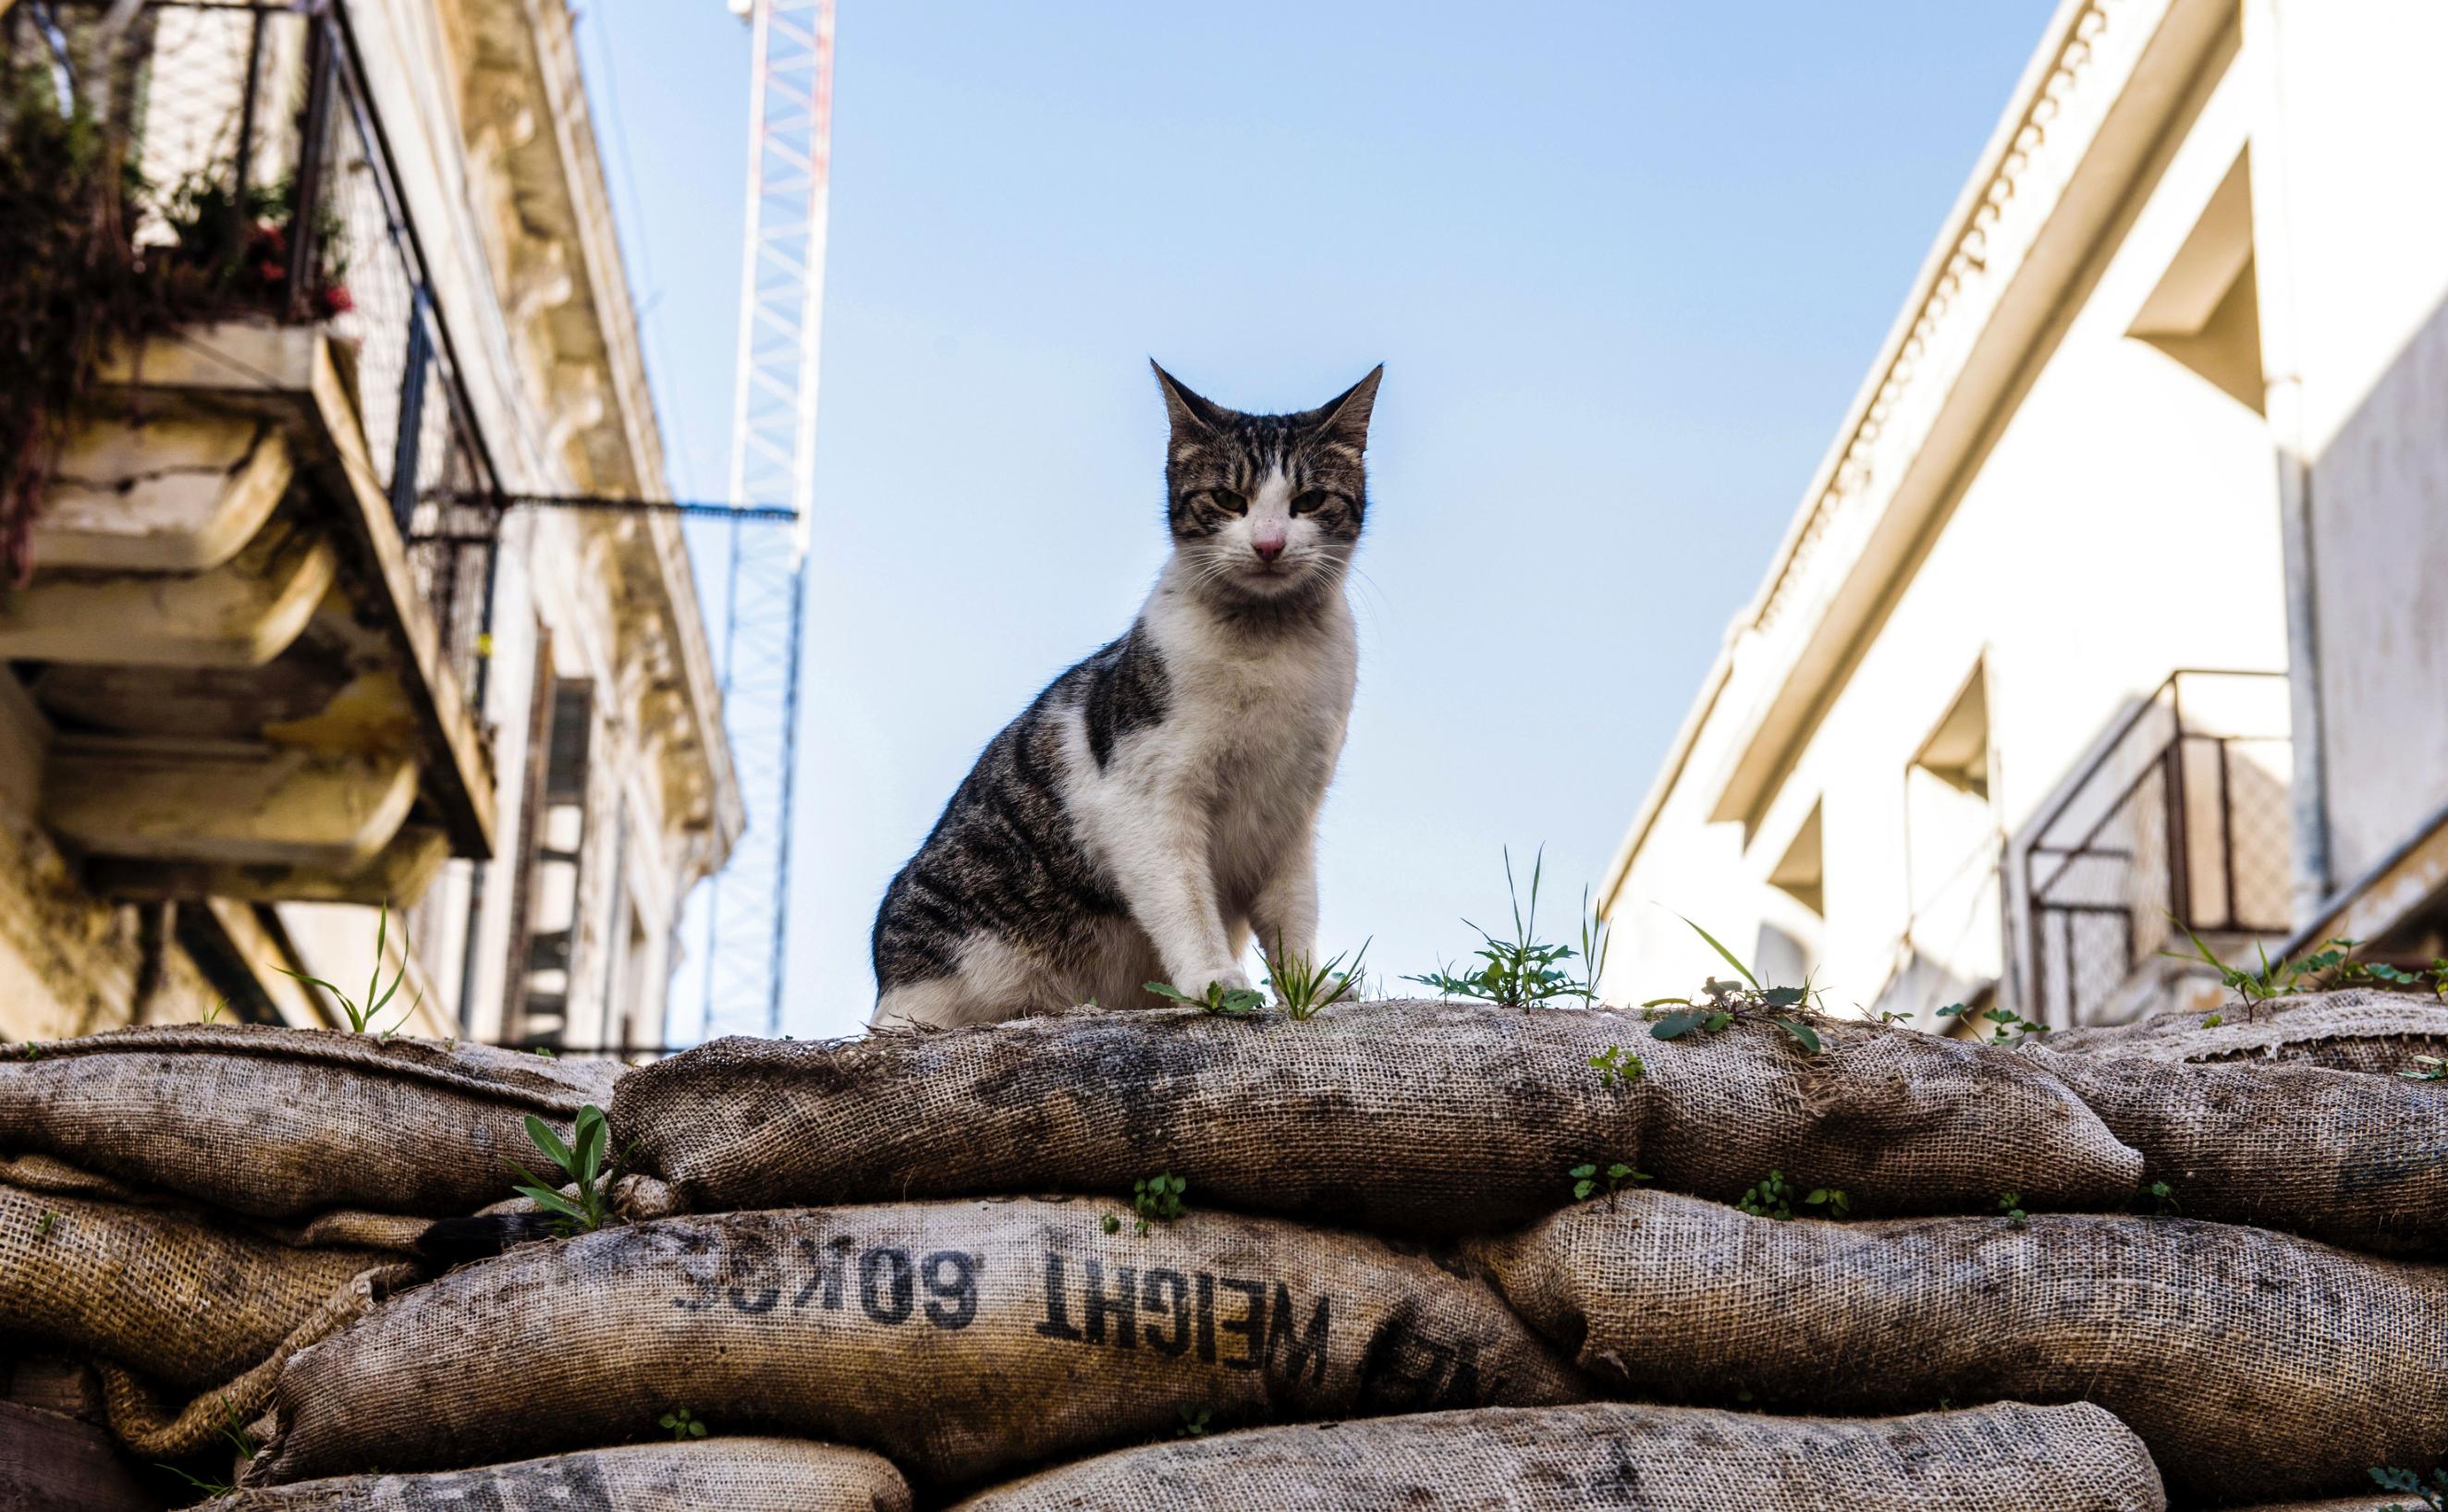 The case against cats: Why Australia has declared war on feral | CNN